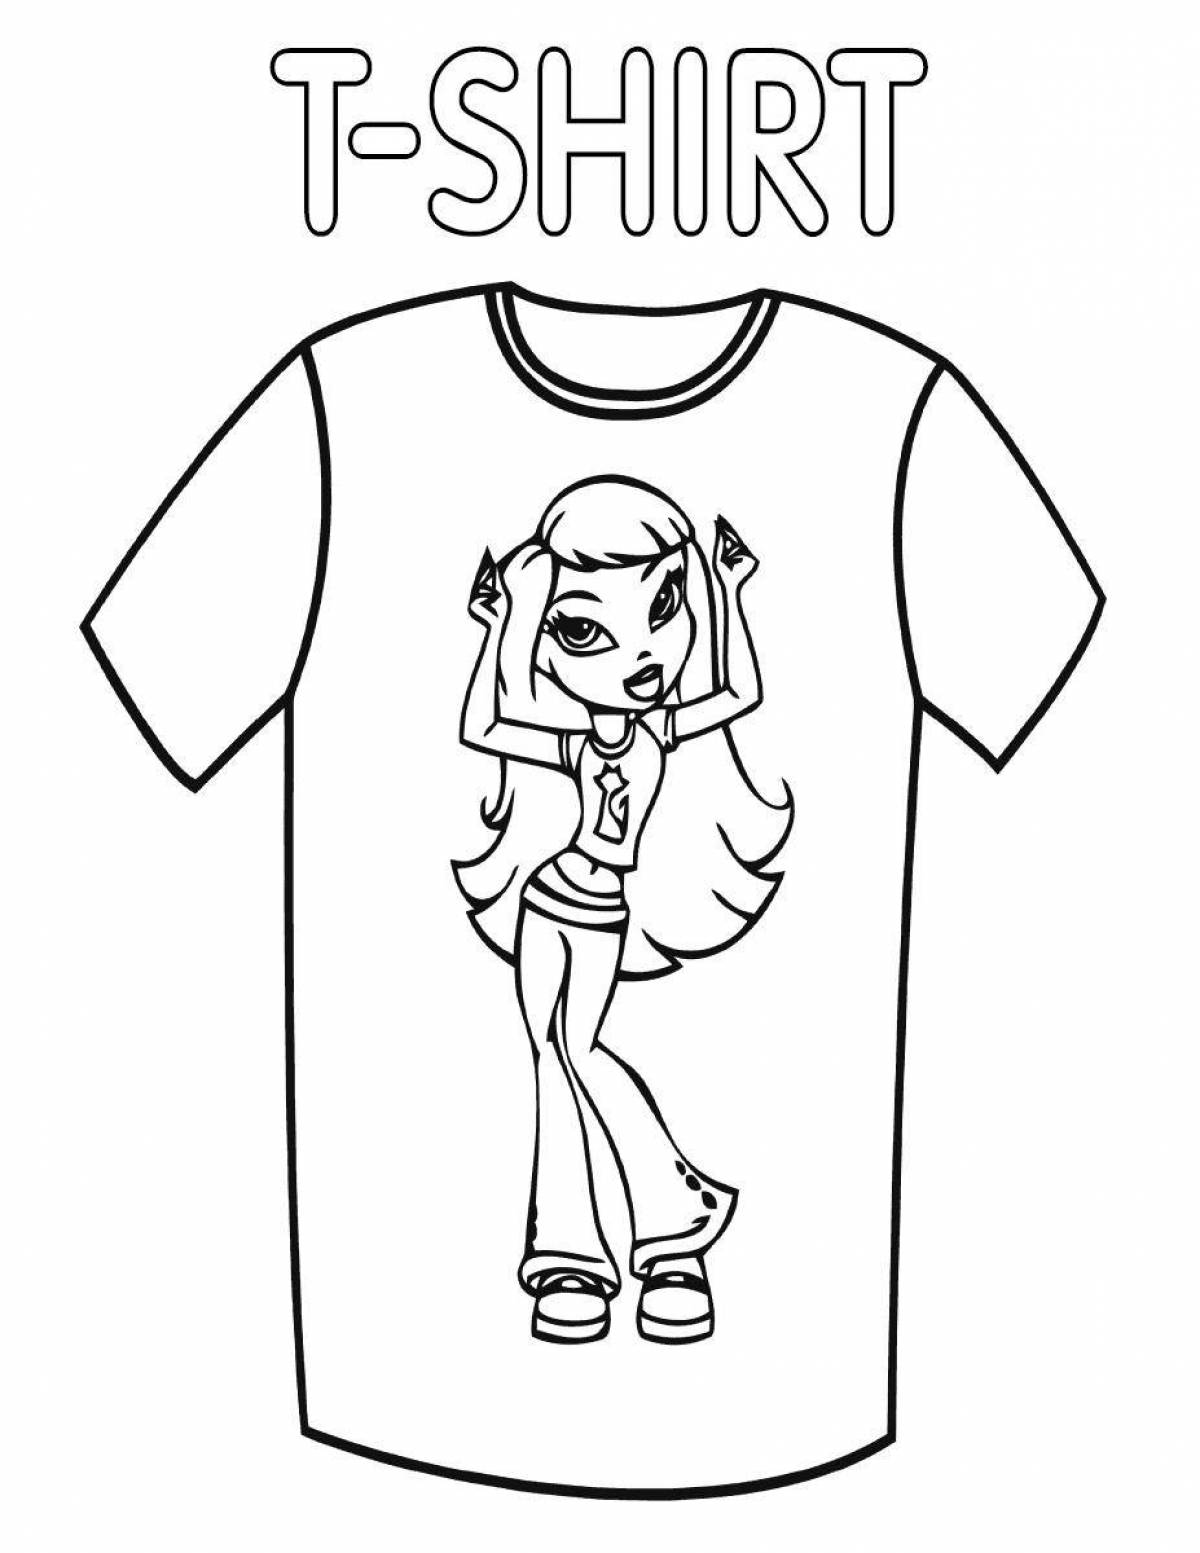 Colorful t-shirt coloring page for kids to learn